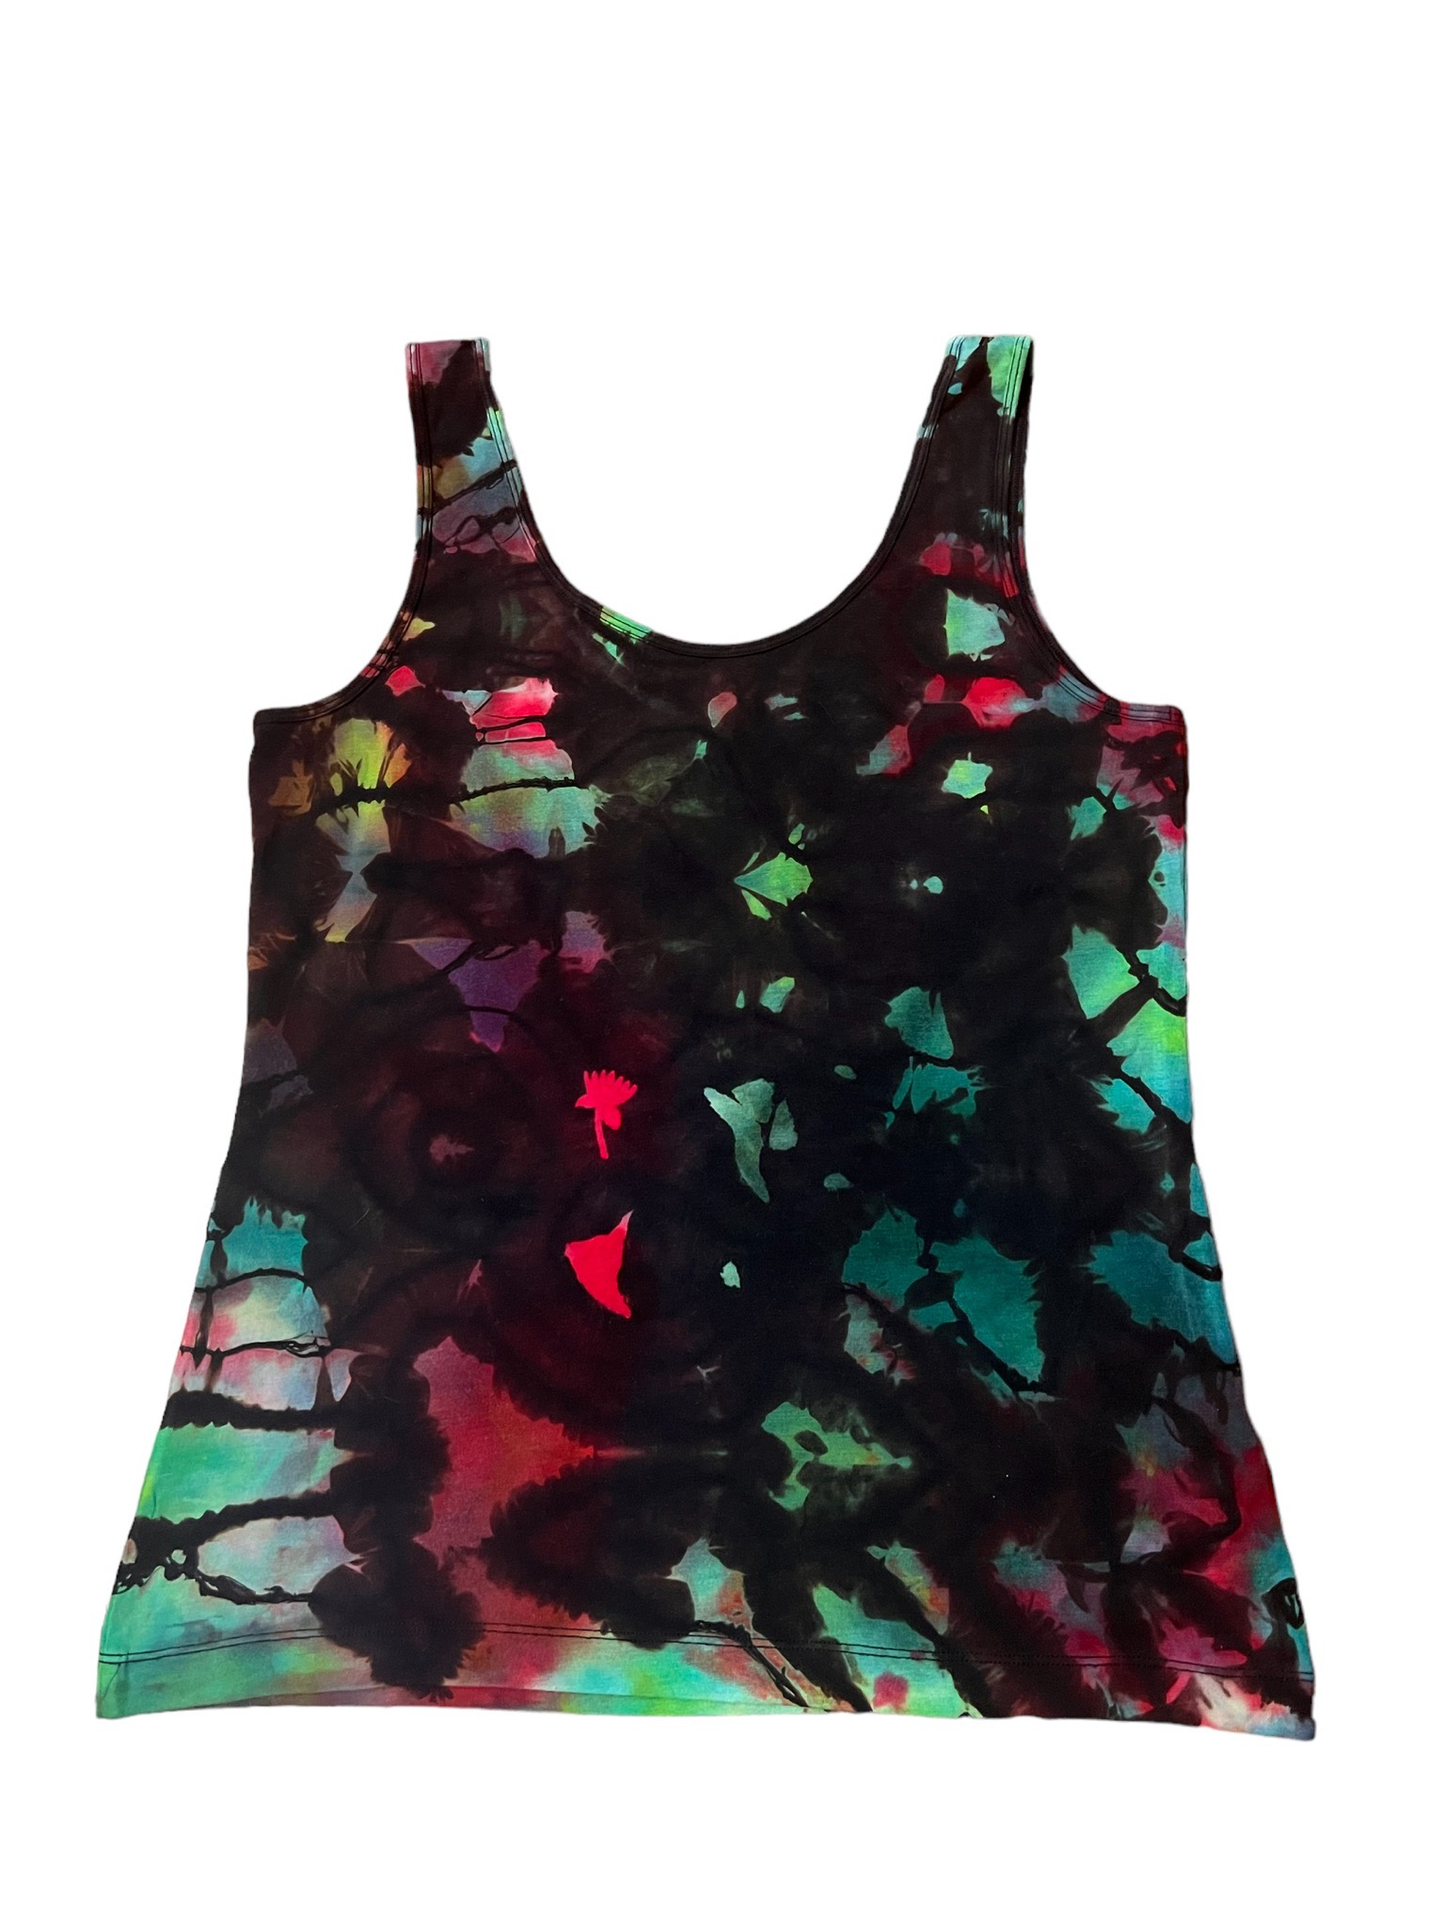 Felina Hand Tie Dye Black Red and Green Tank Top Women | Size XL| Great Layer Tee To Wear Along | Gift For Her | Women's Clothing | Front